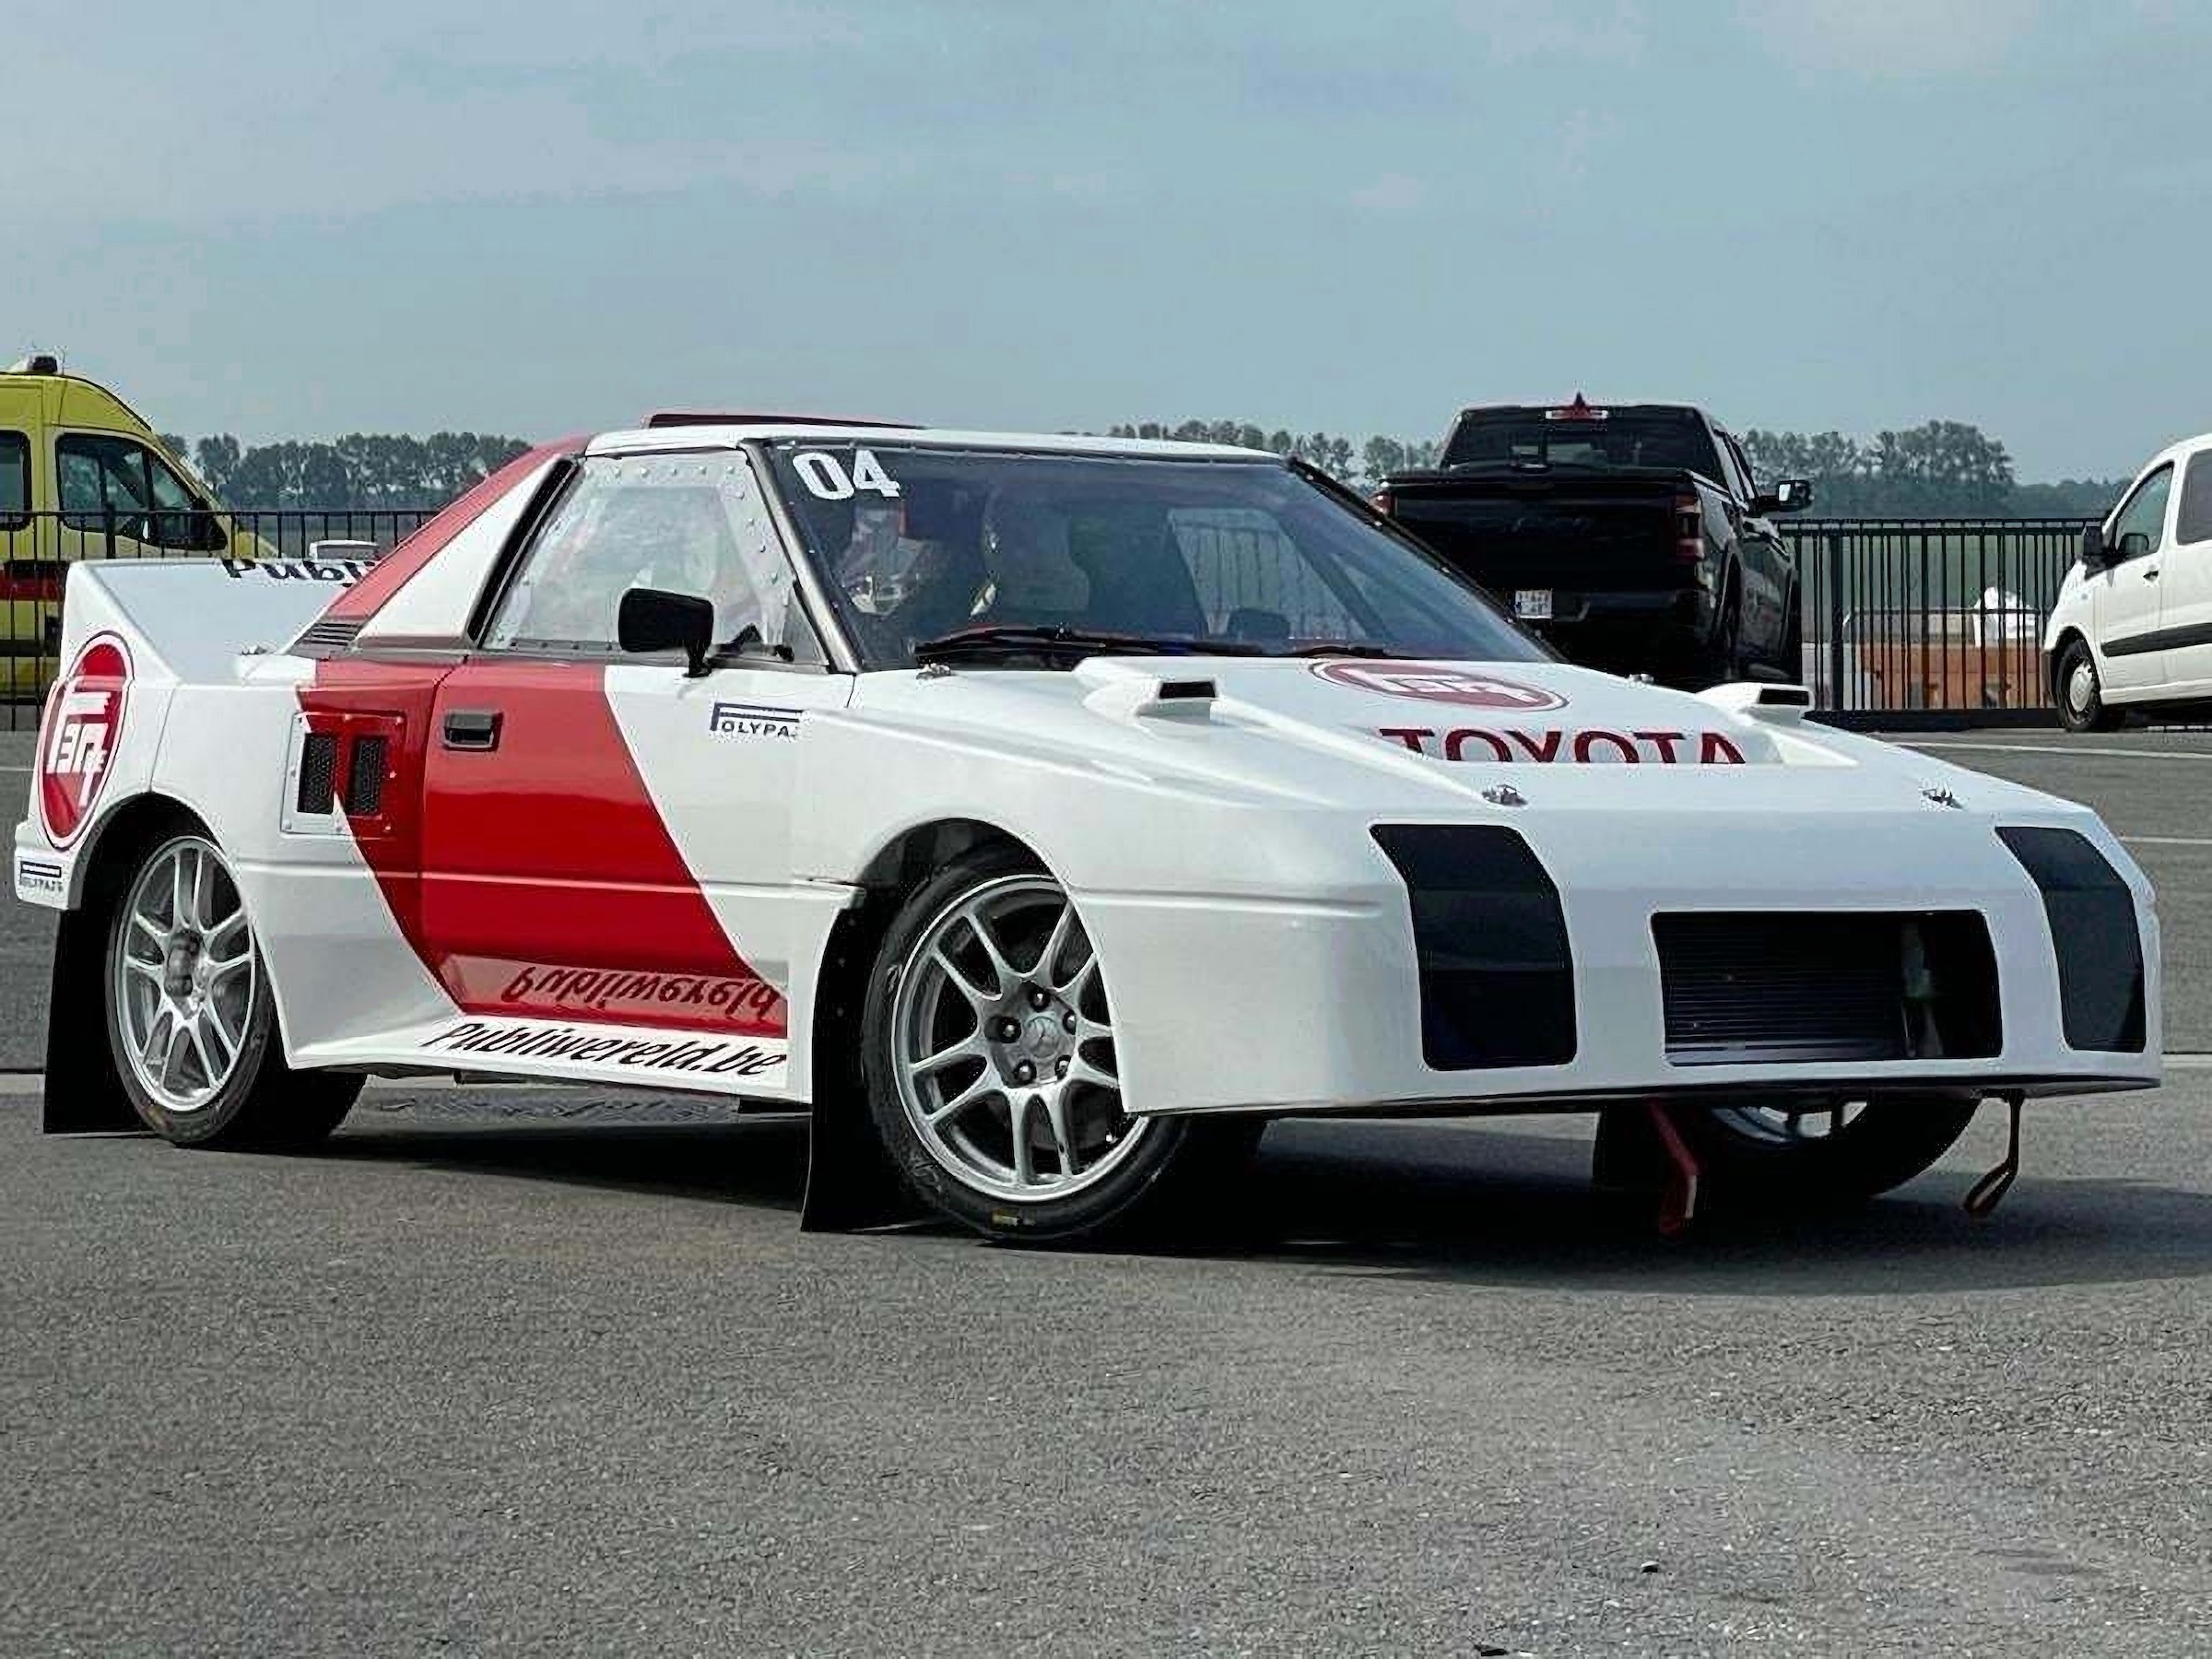 WRC fans offered chance to ride in ultra-rare Toyota 222D rally replica